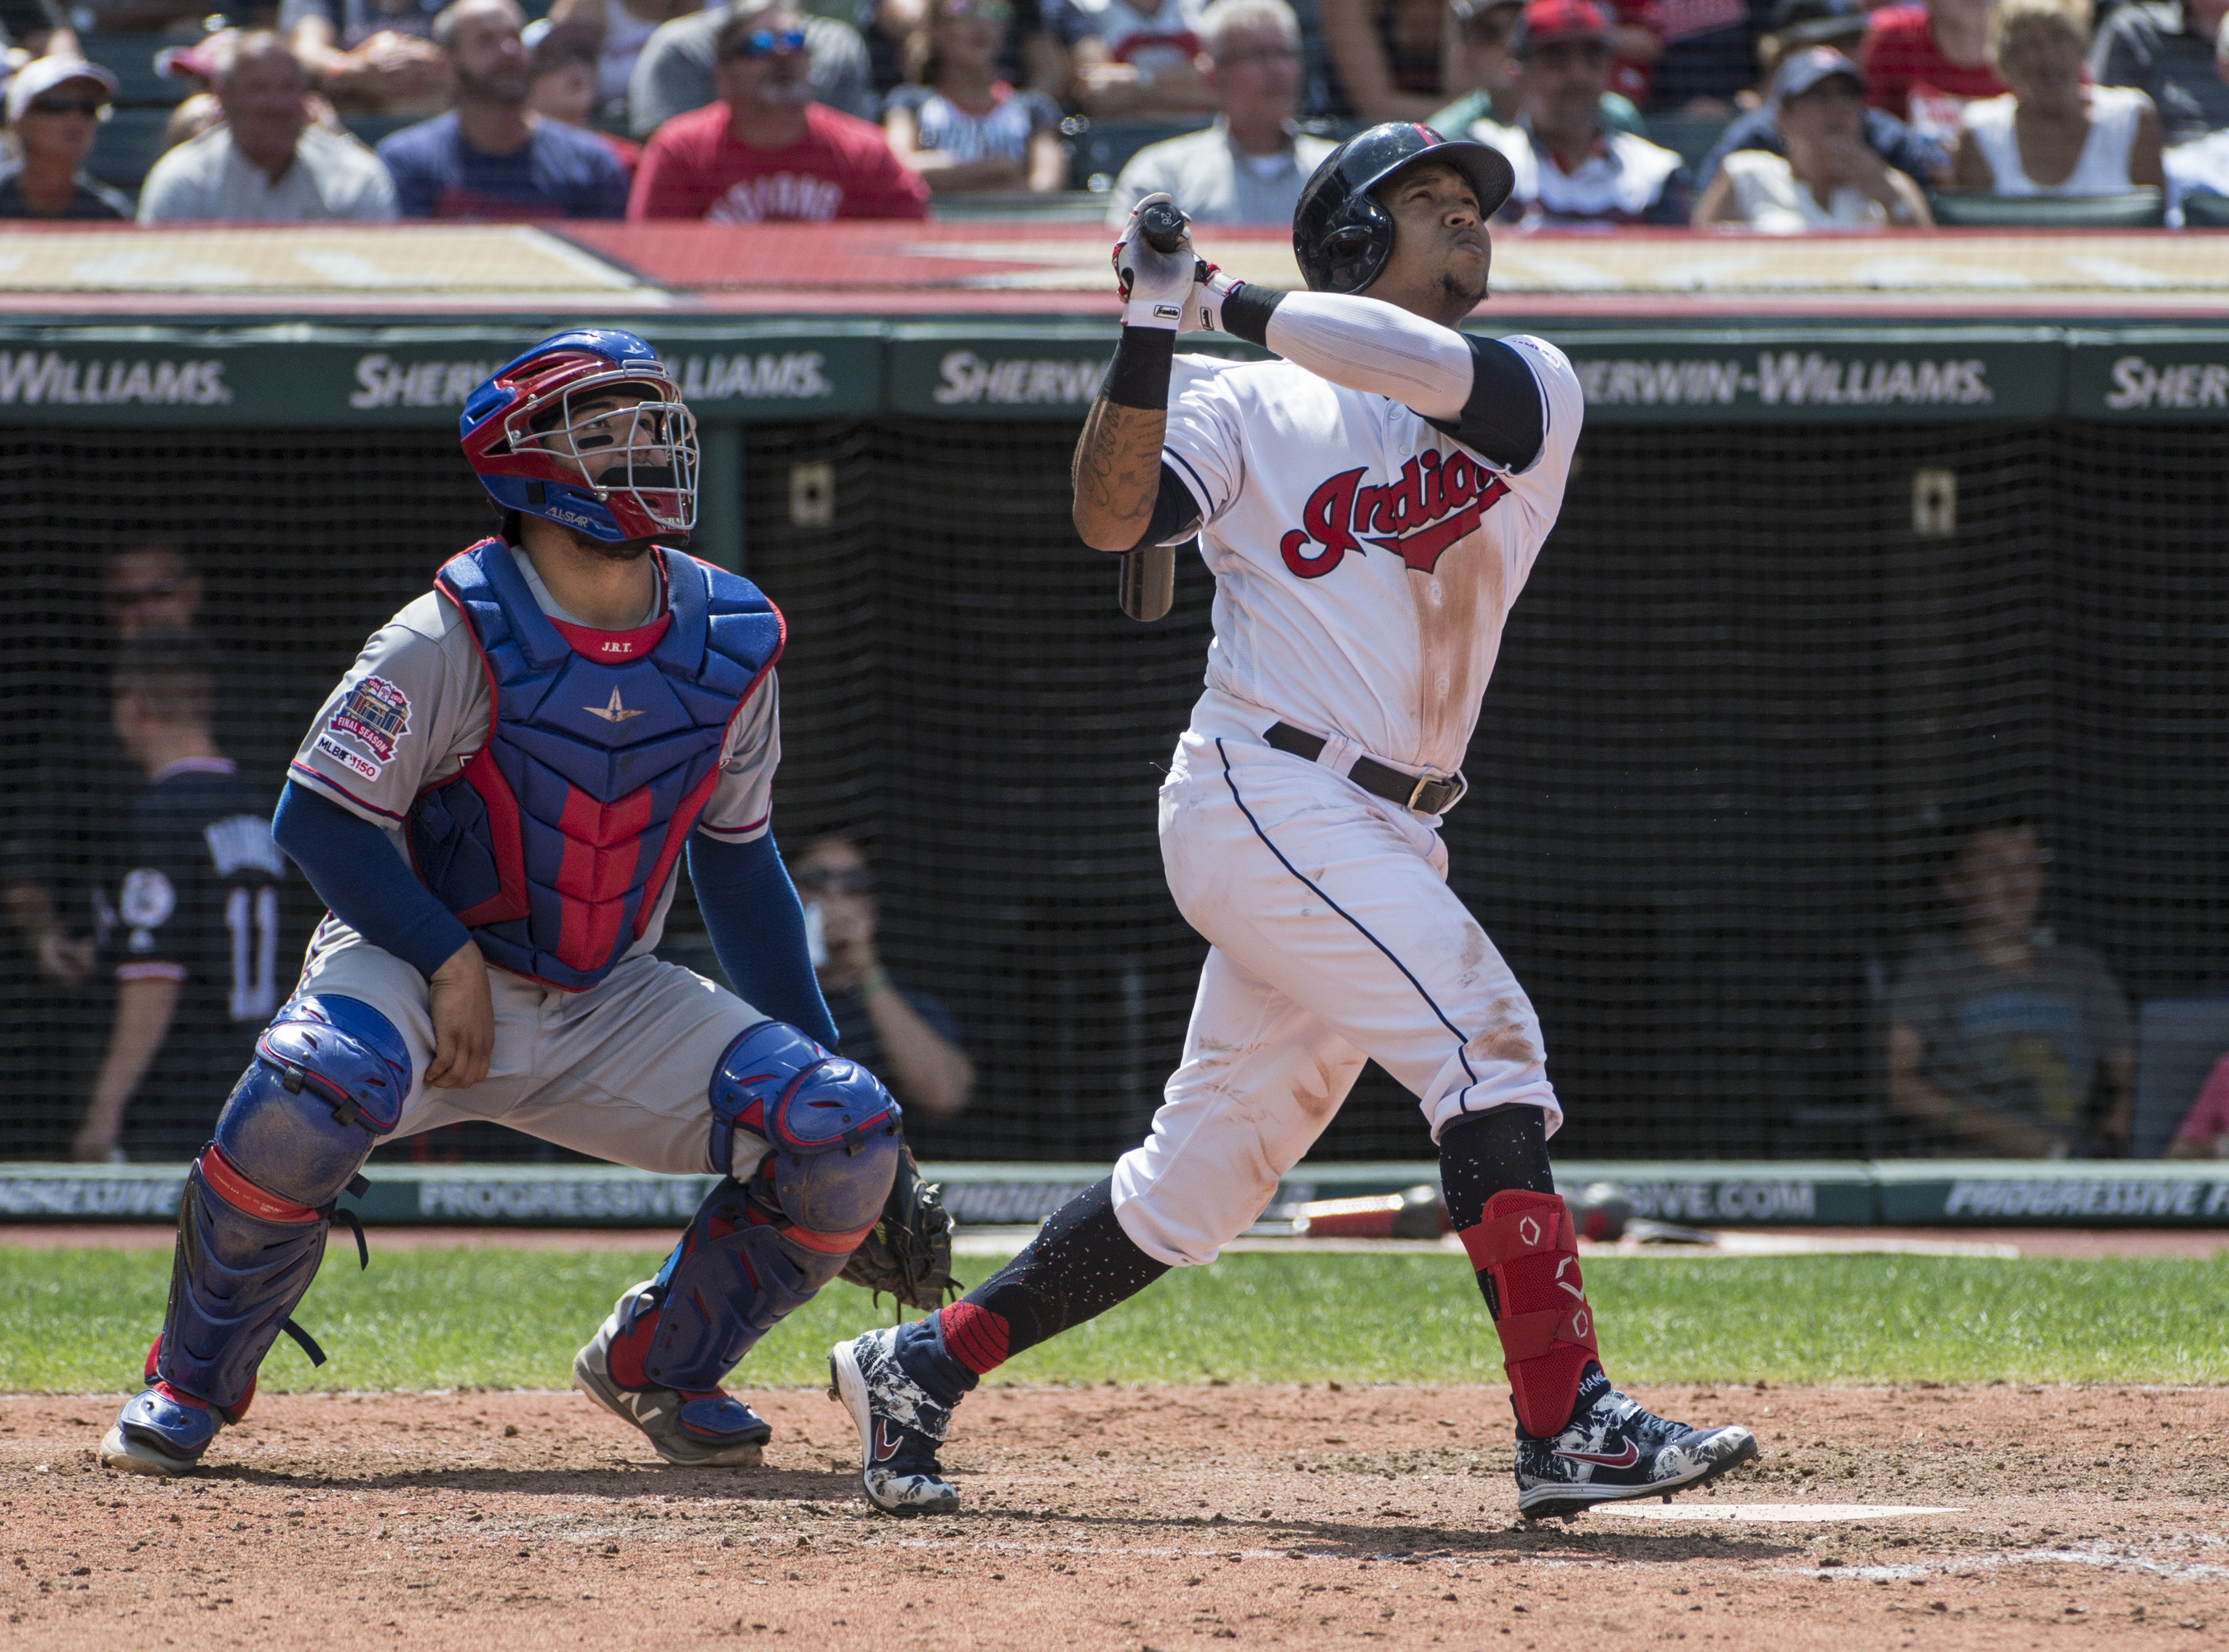 Indians sweep Rangers in doubleheader, gear up for Twins